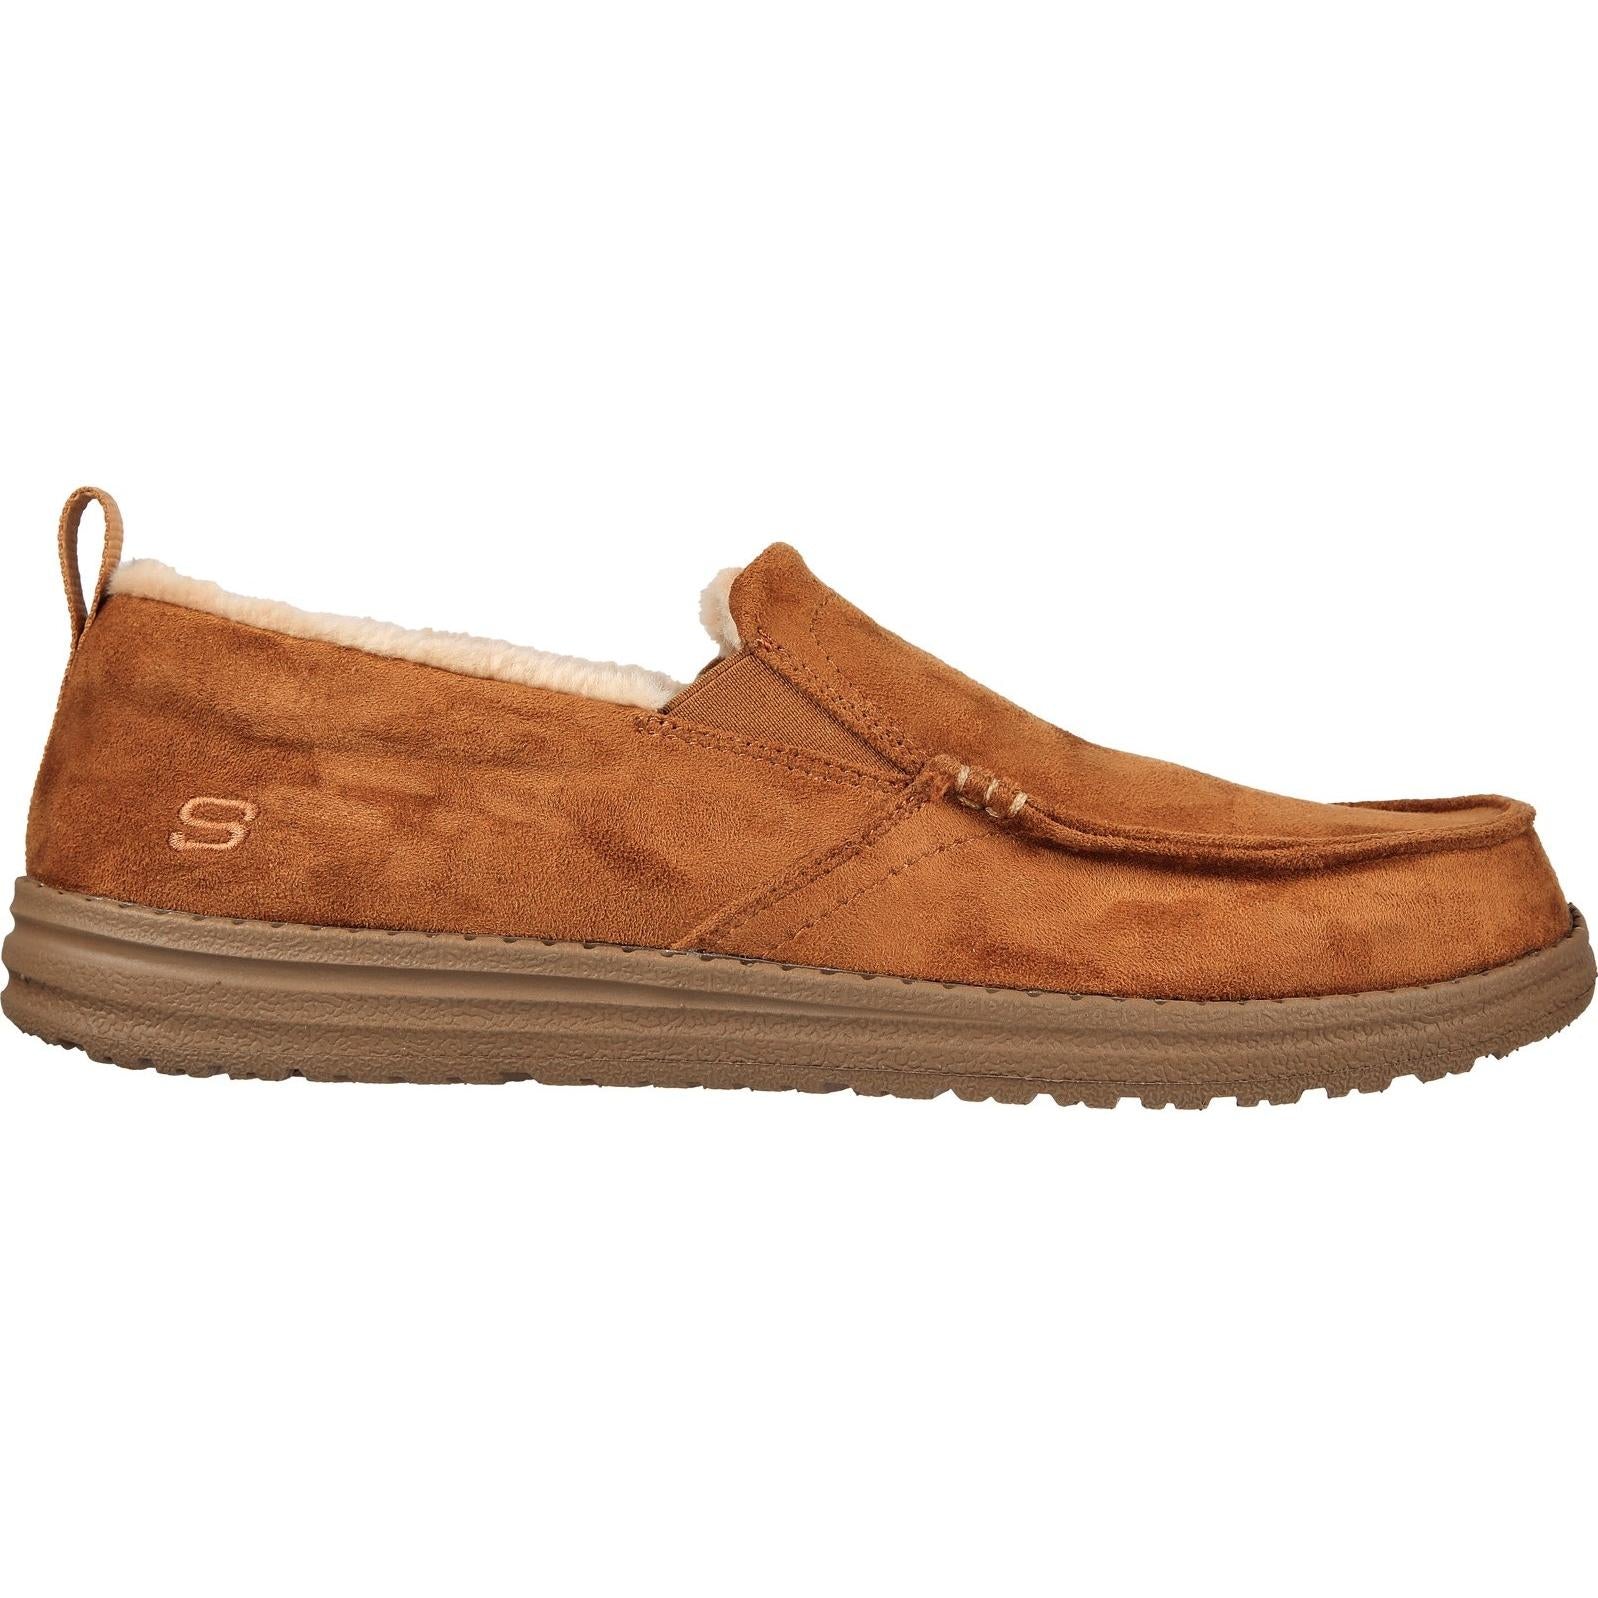 Skechers Relaxed Fit: Melson - Willmore Slipper